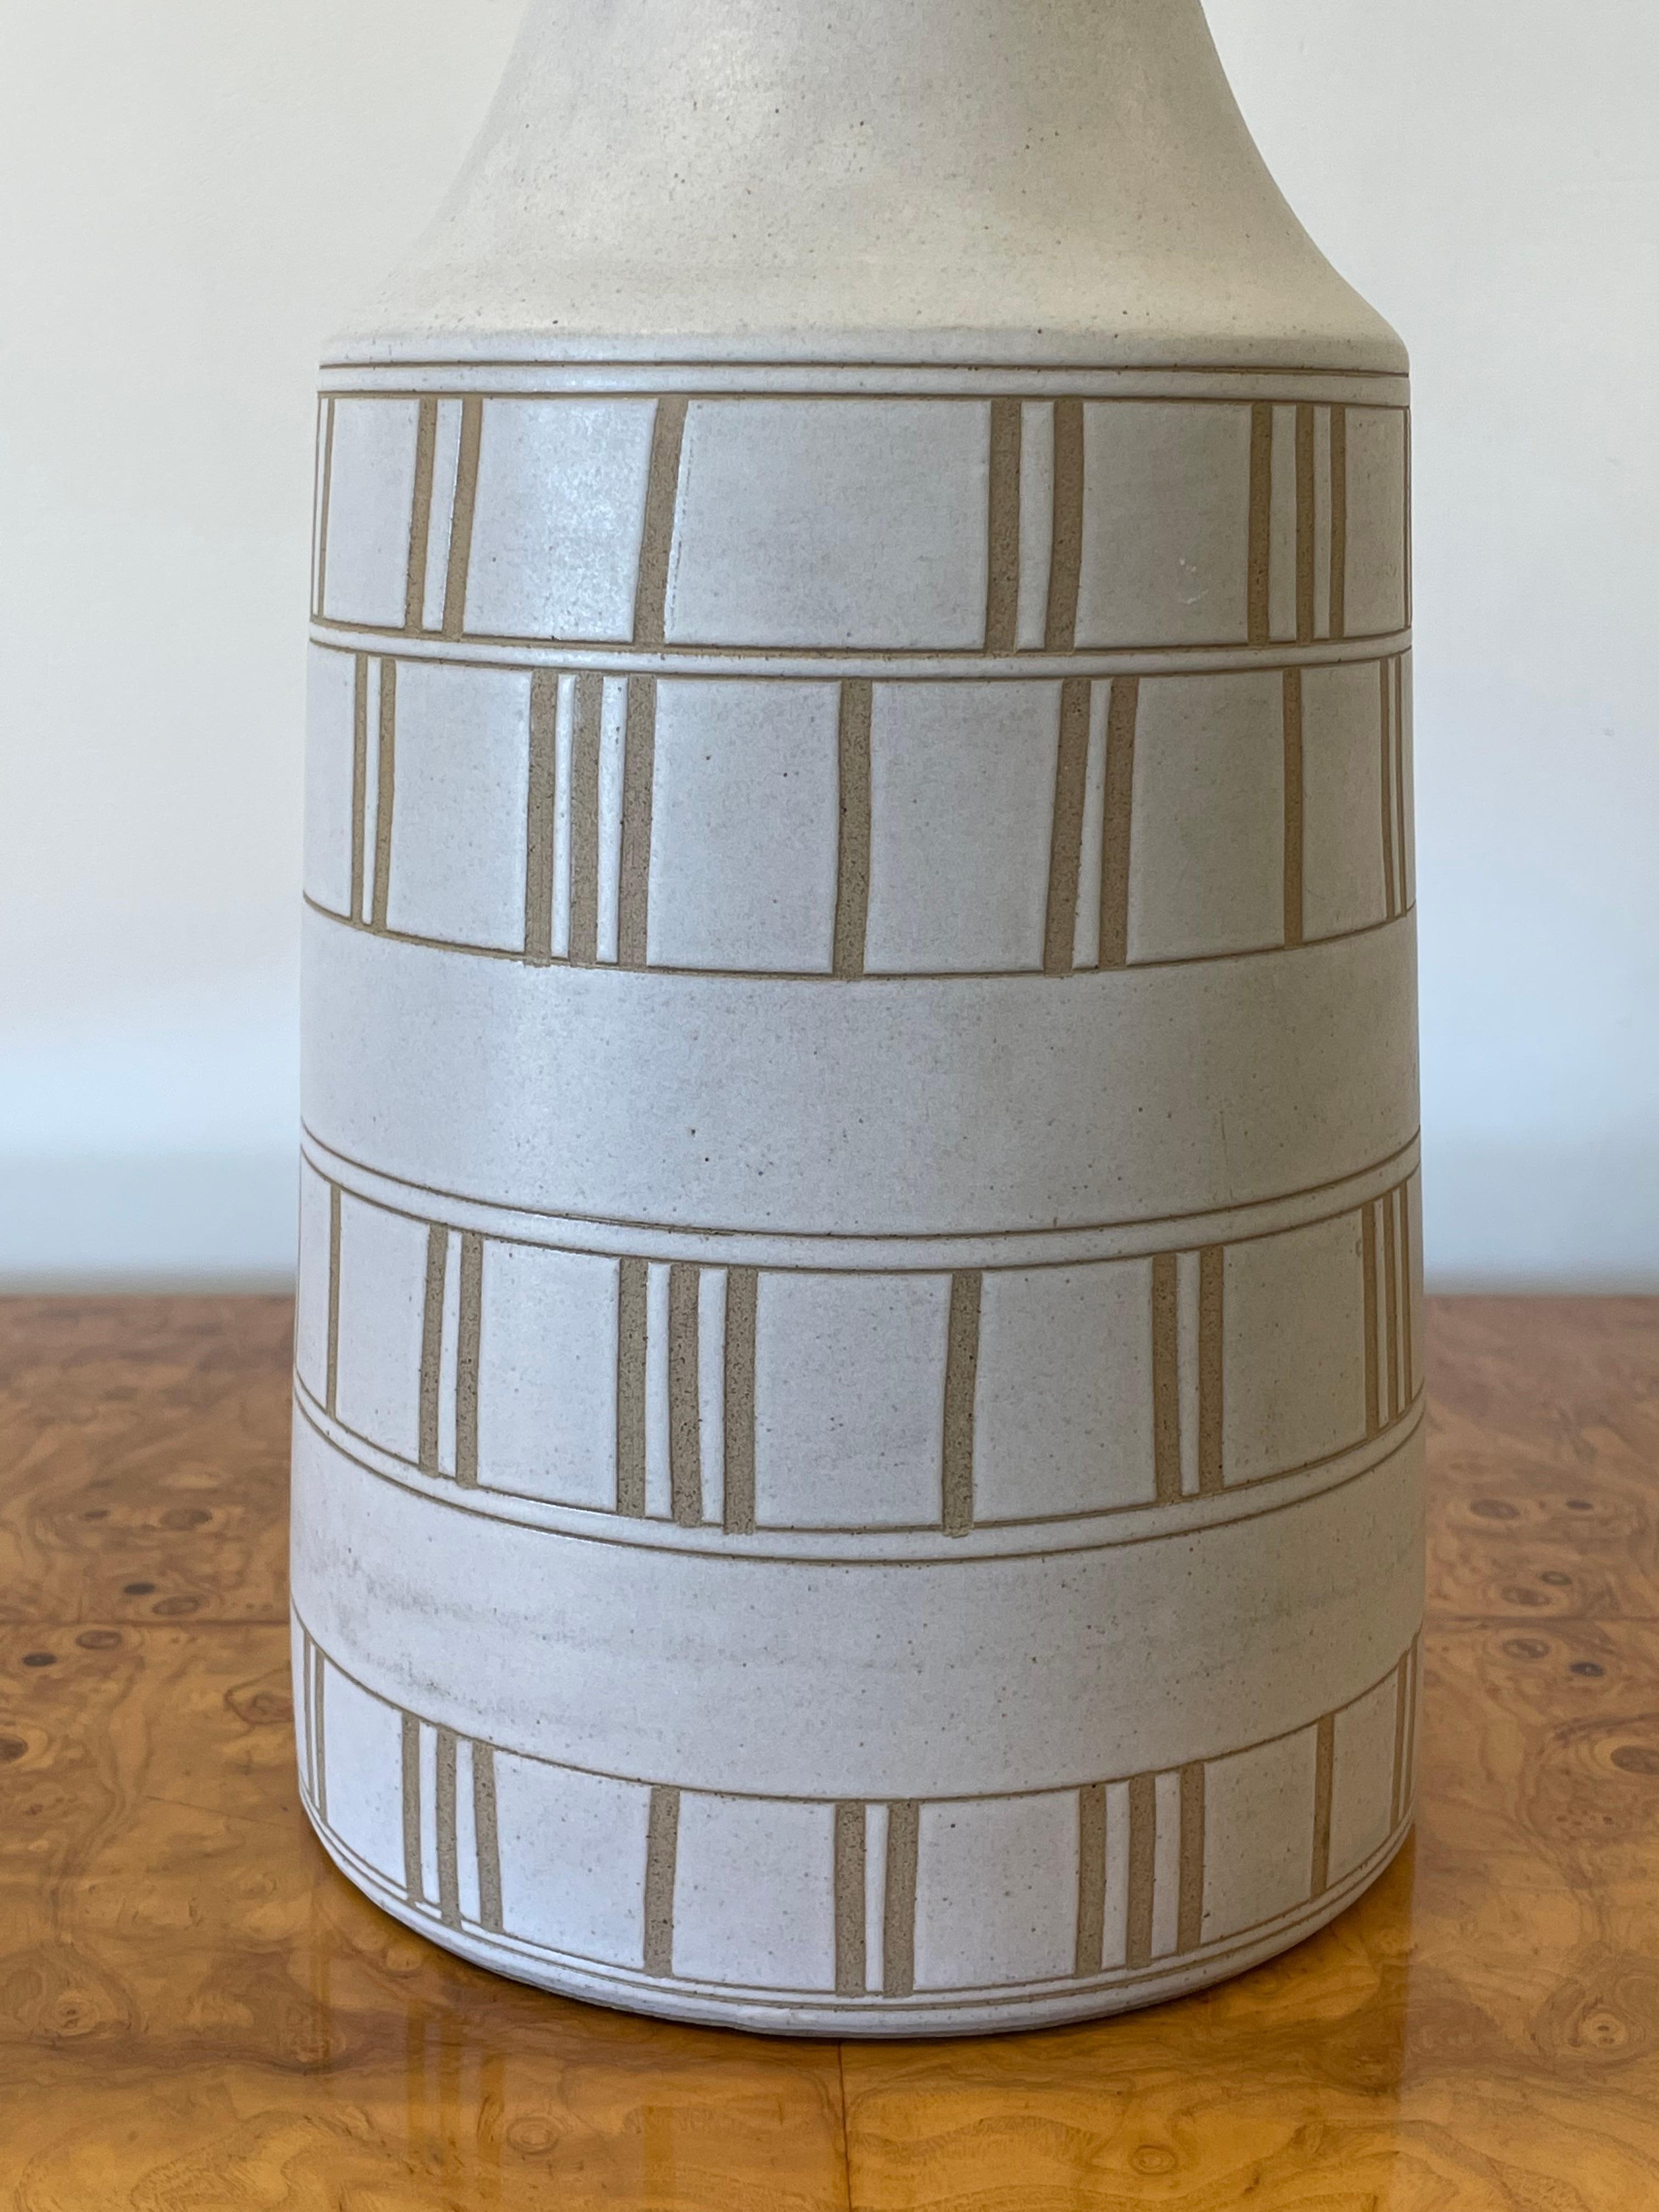 Large table lamp by famed ceramicist duo Jane and Gordon Martz for Marshall Studios. Great neutral color palette in off white and tan.

Overall
32.5” tall
17” wide 

Ceramic 
15.5” tall
7.5” wide.
 